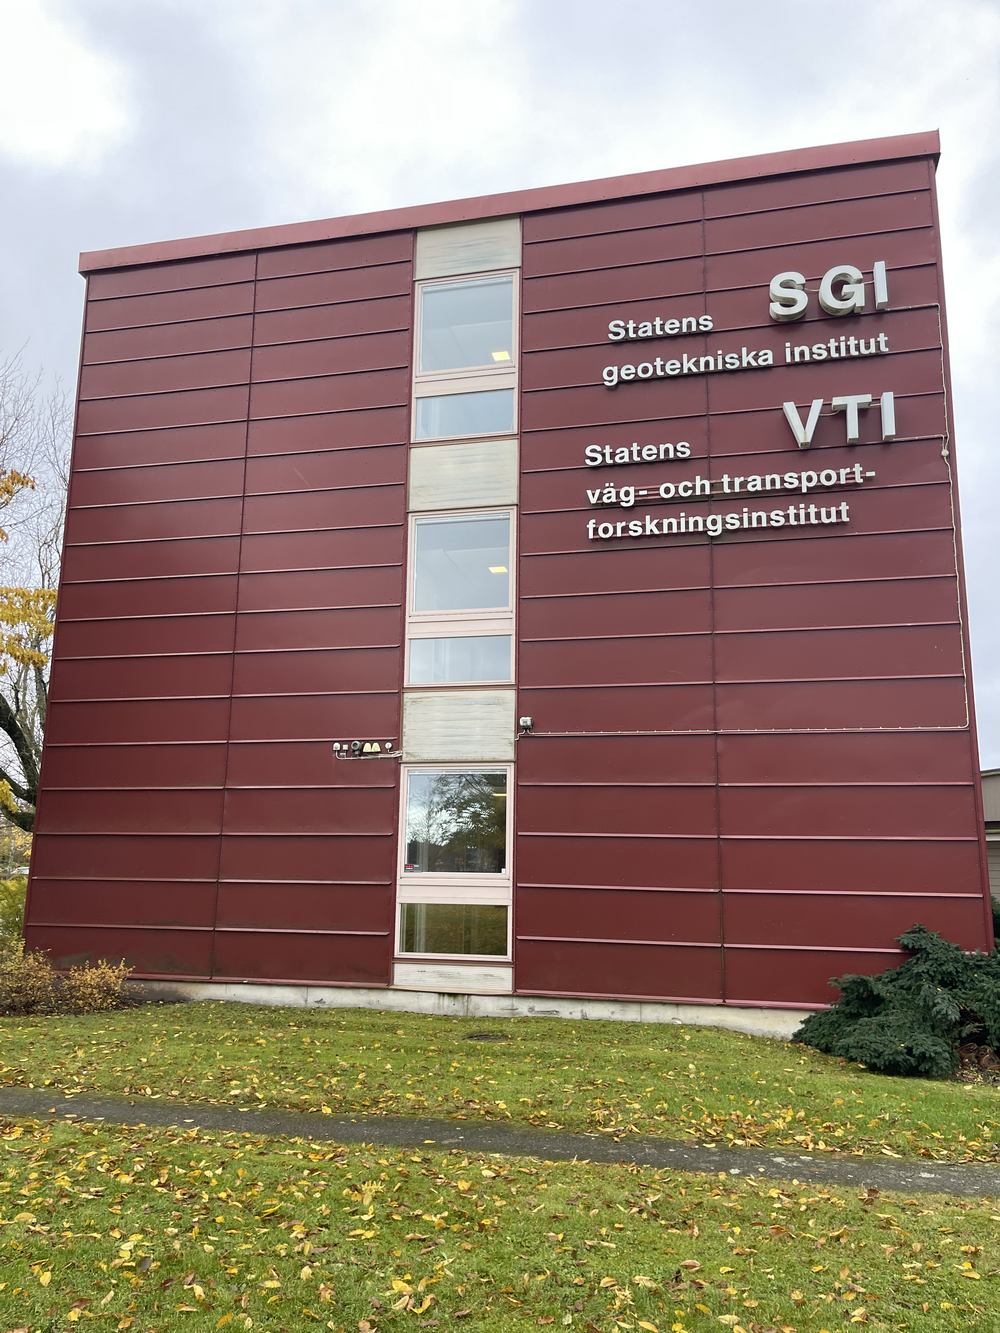 VTI (Swedish National Road and Transport Research Institute)